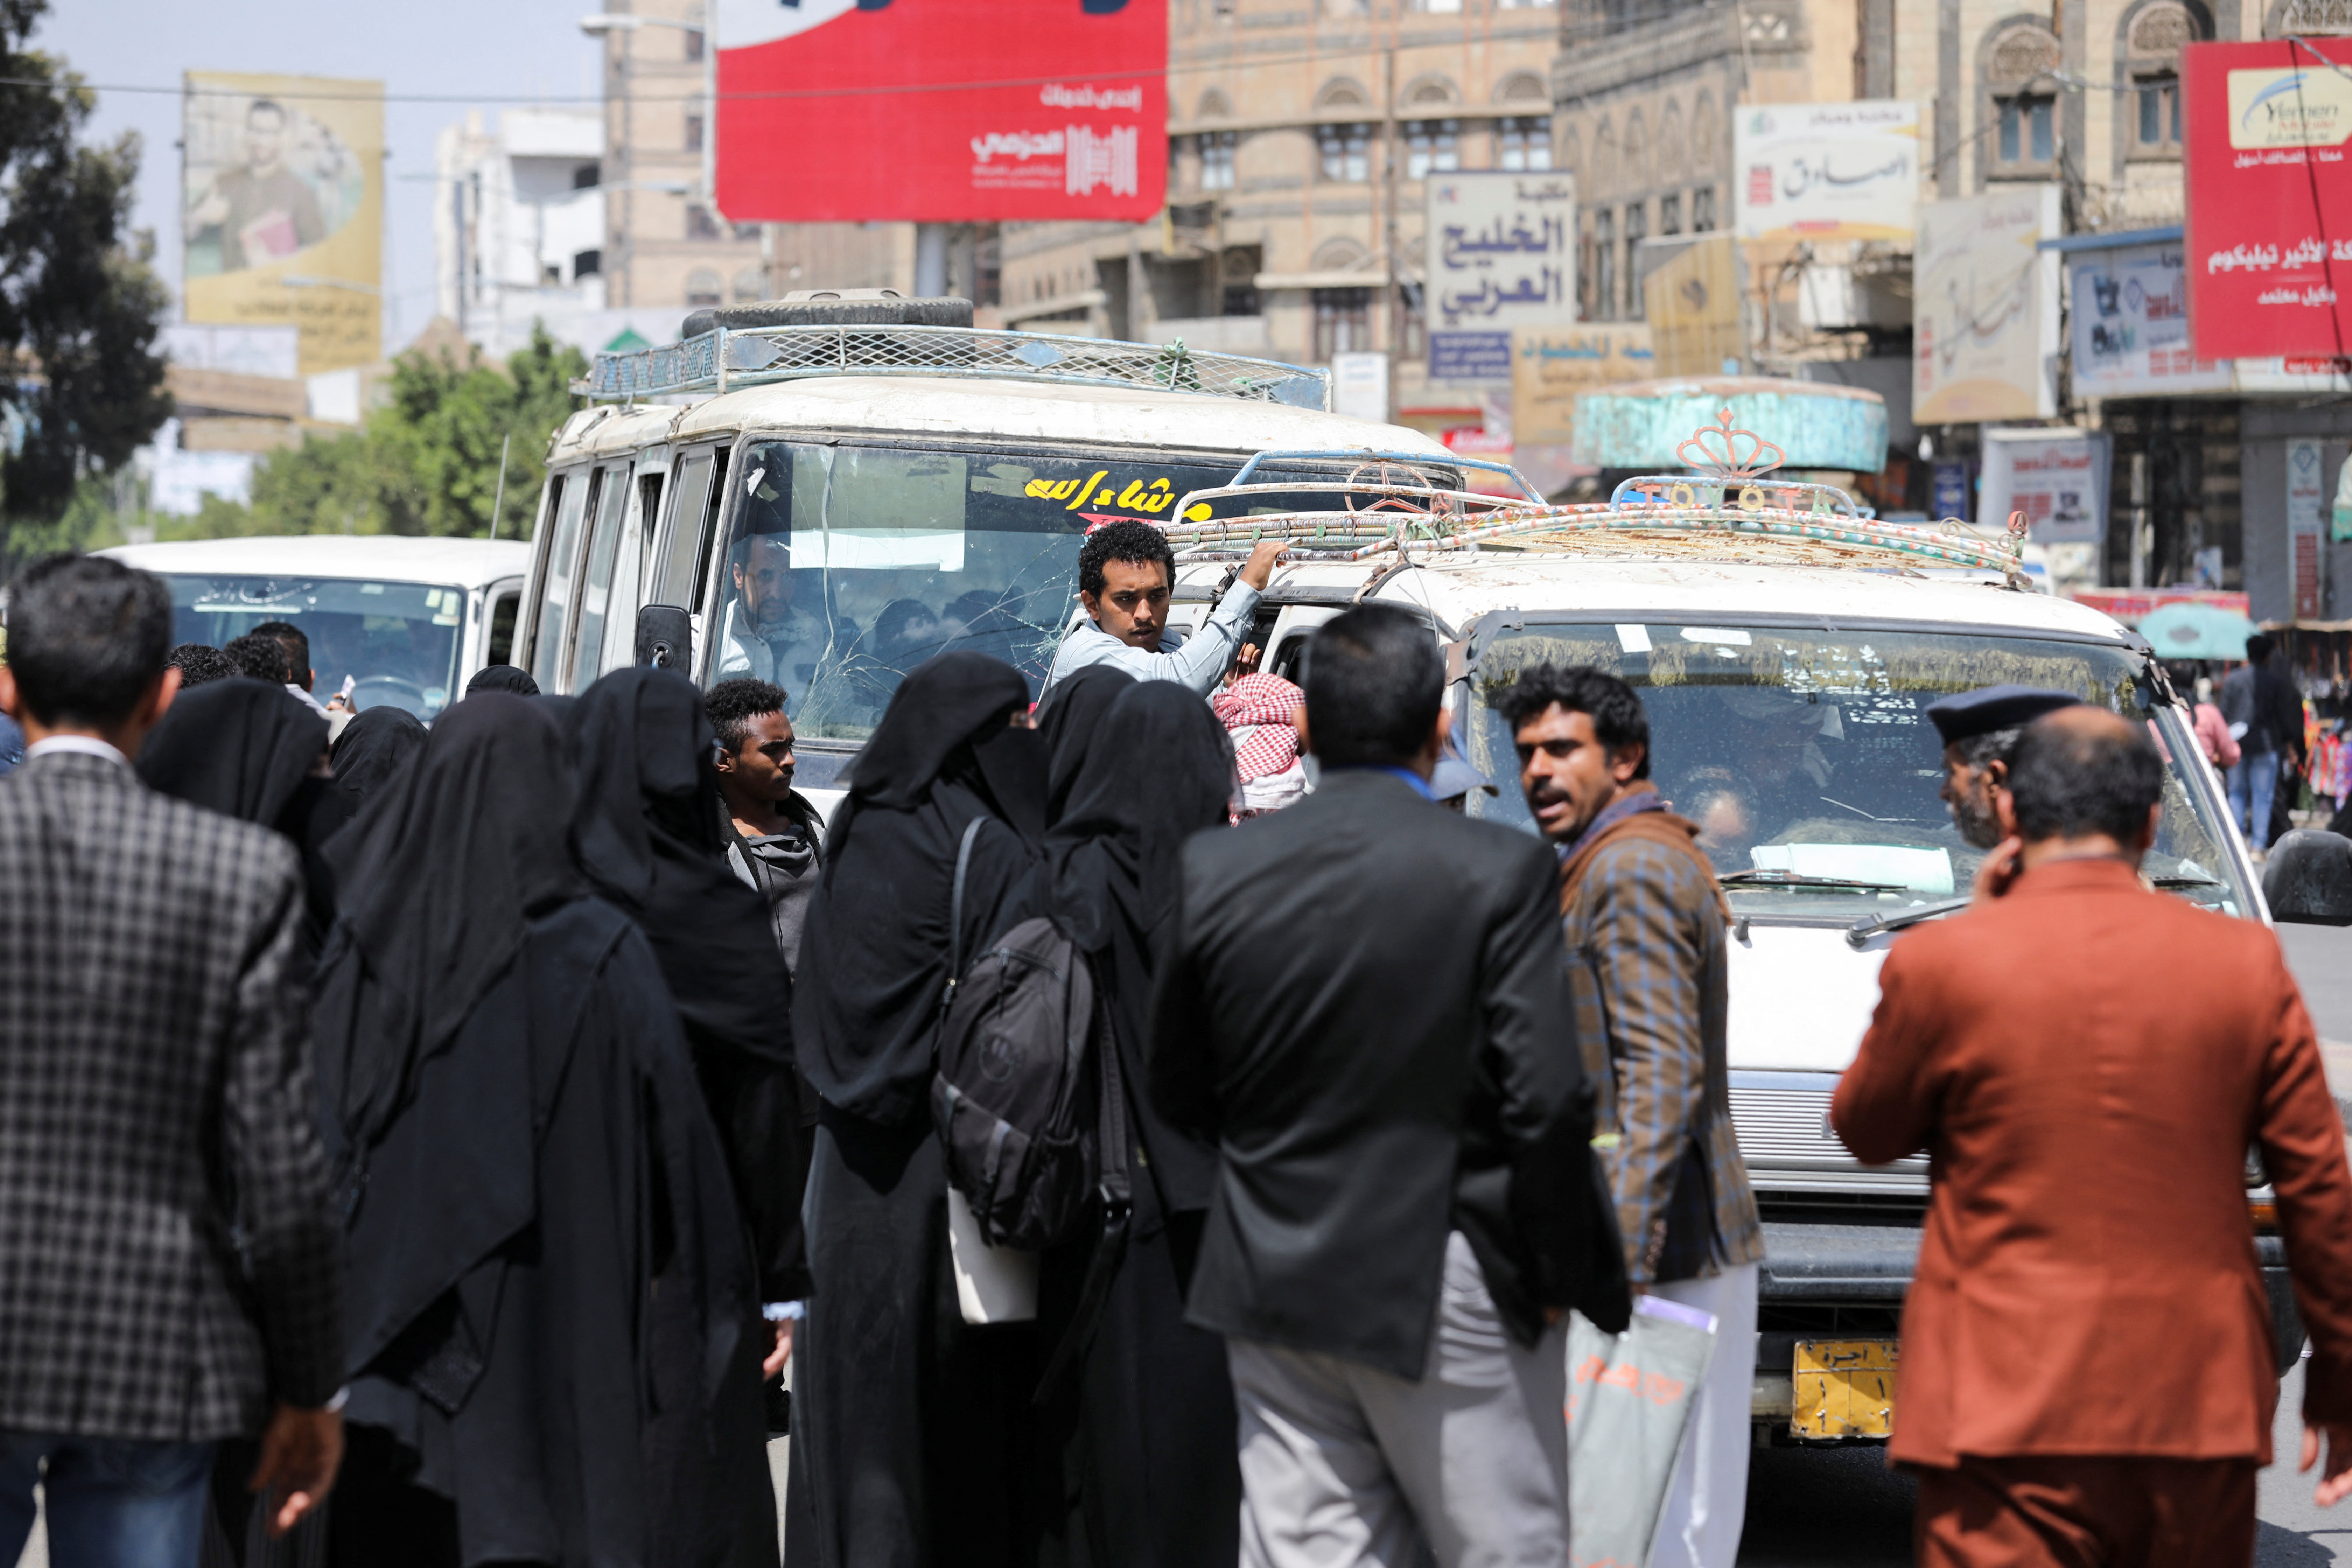 People wait for buses on a street amid an acute fuel shortage in Sanaa